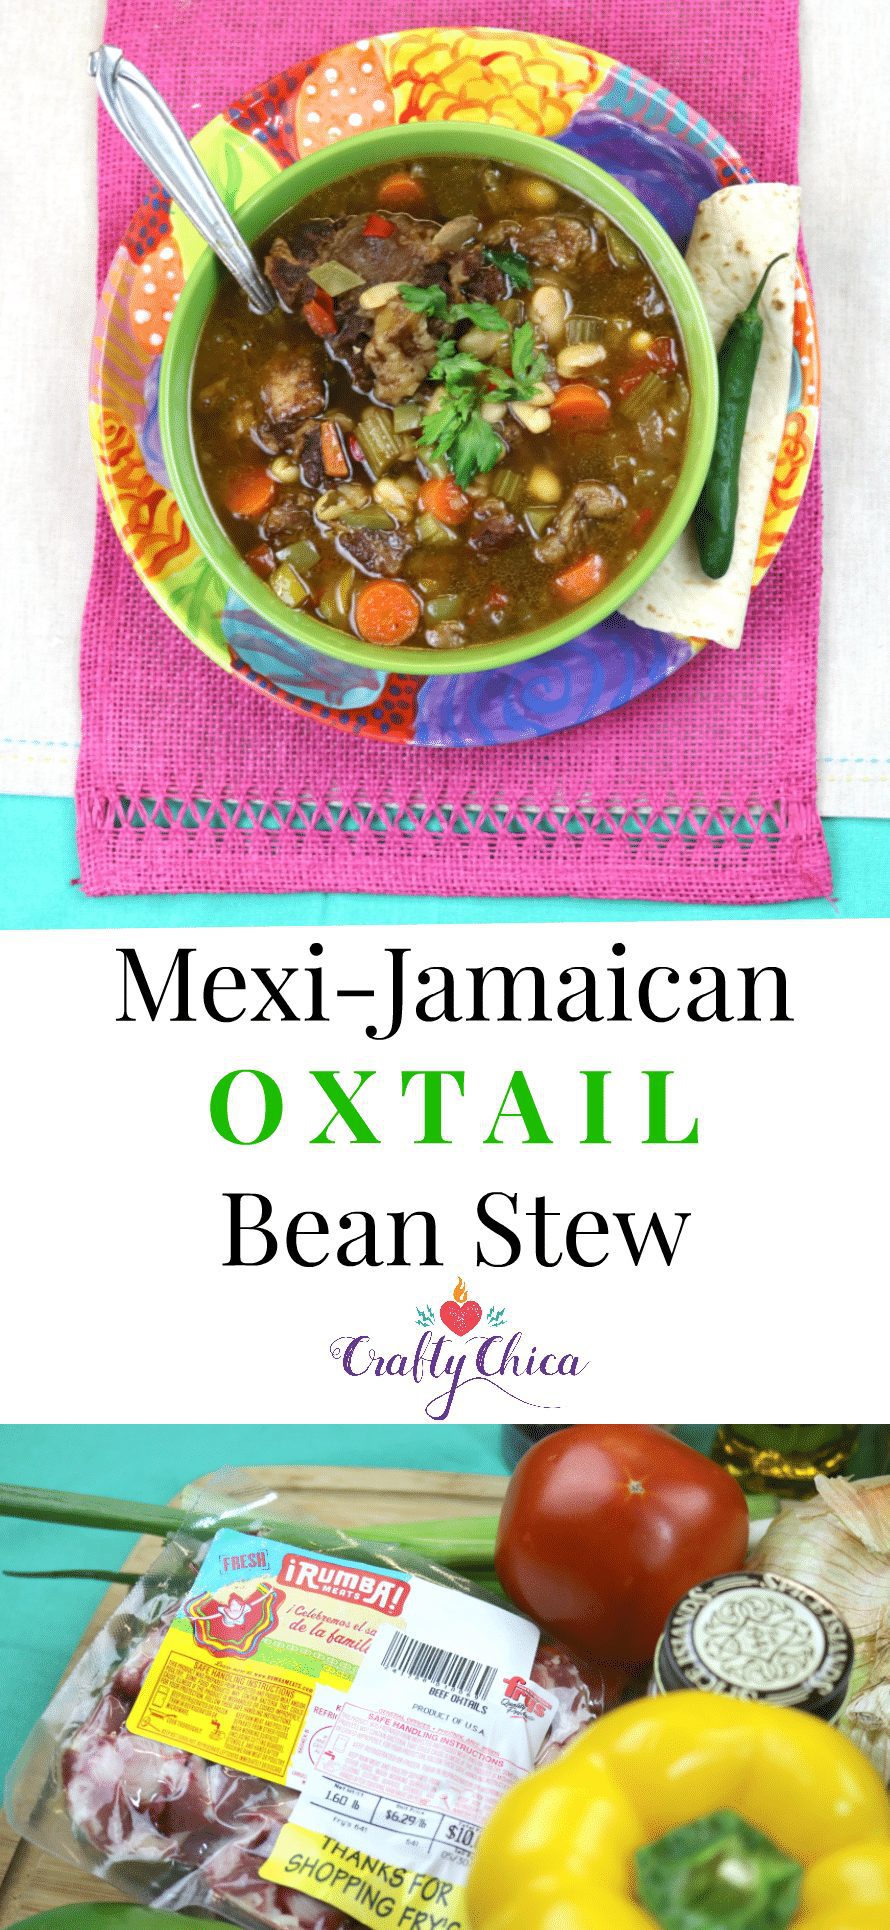 Mexi-Jamaican Oxtail Bean Stew by Crafty Chica.